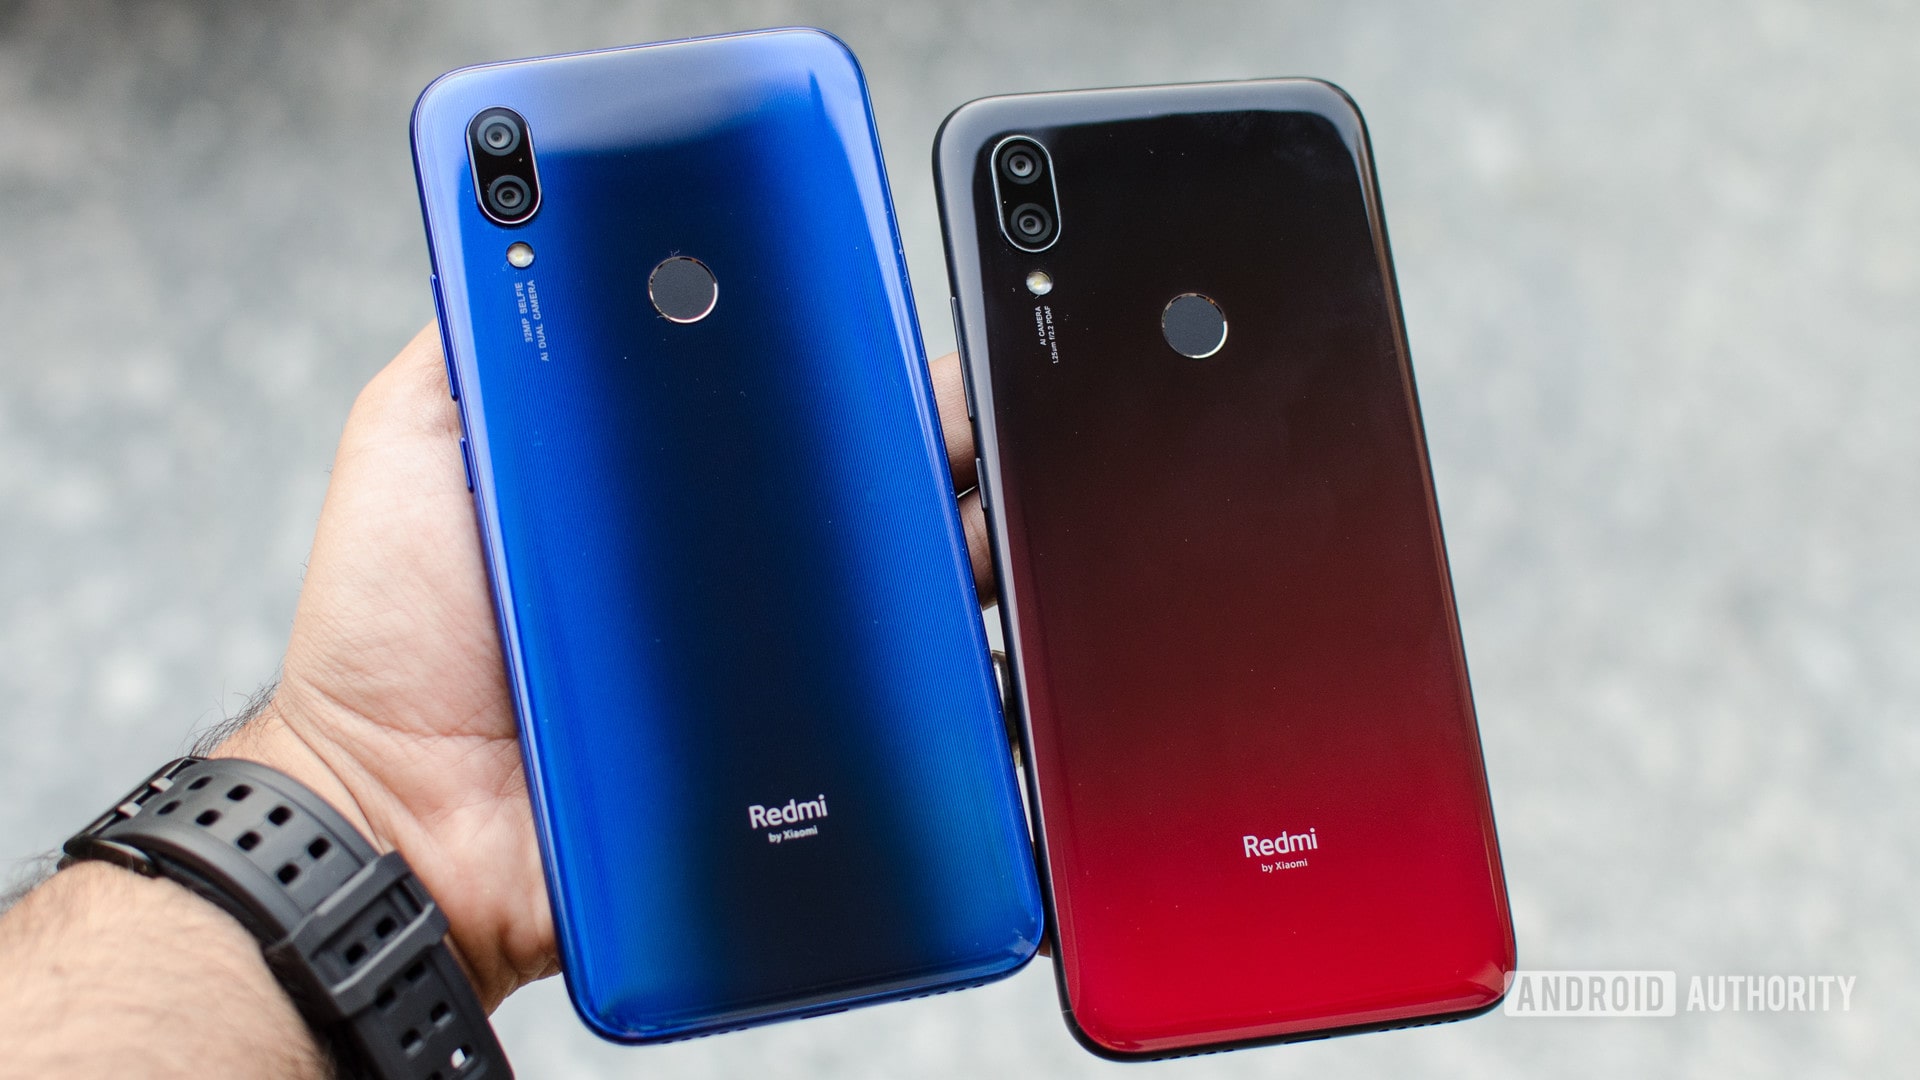 Redmi Y3 and Redmi 7 in hand